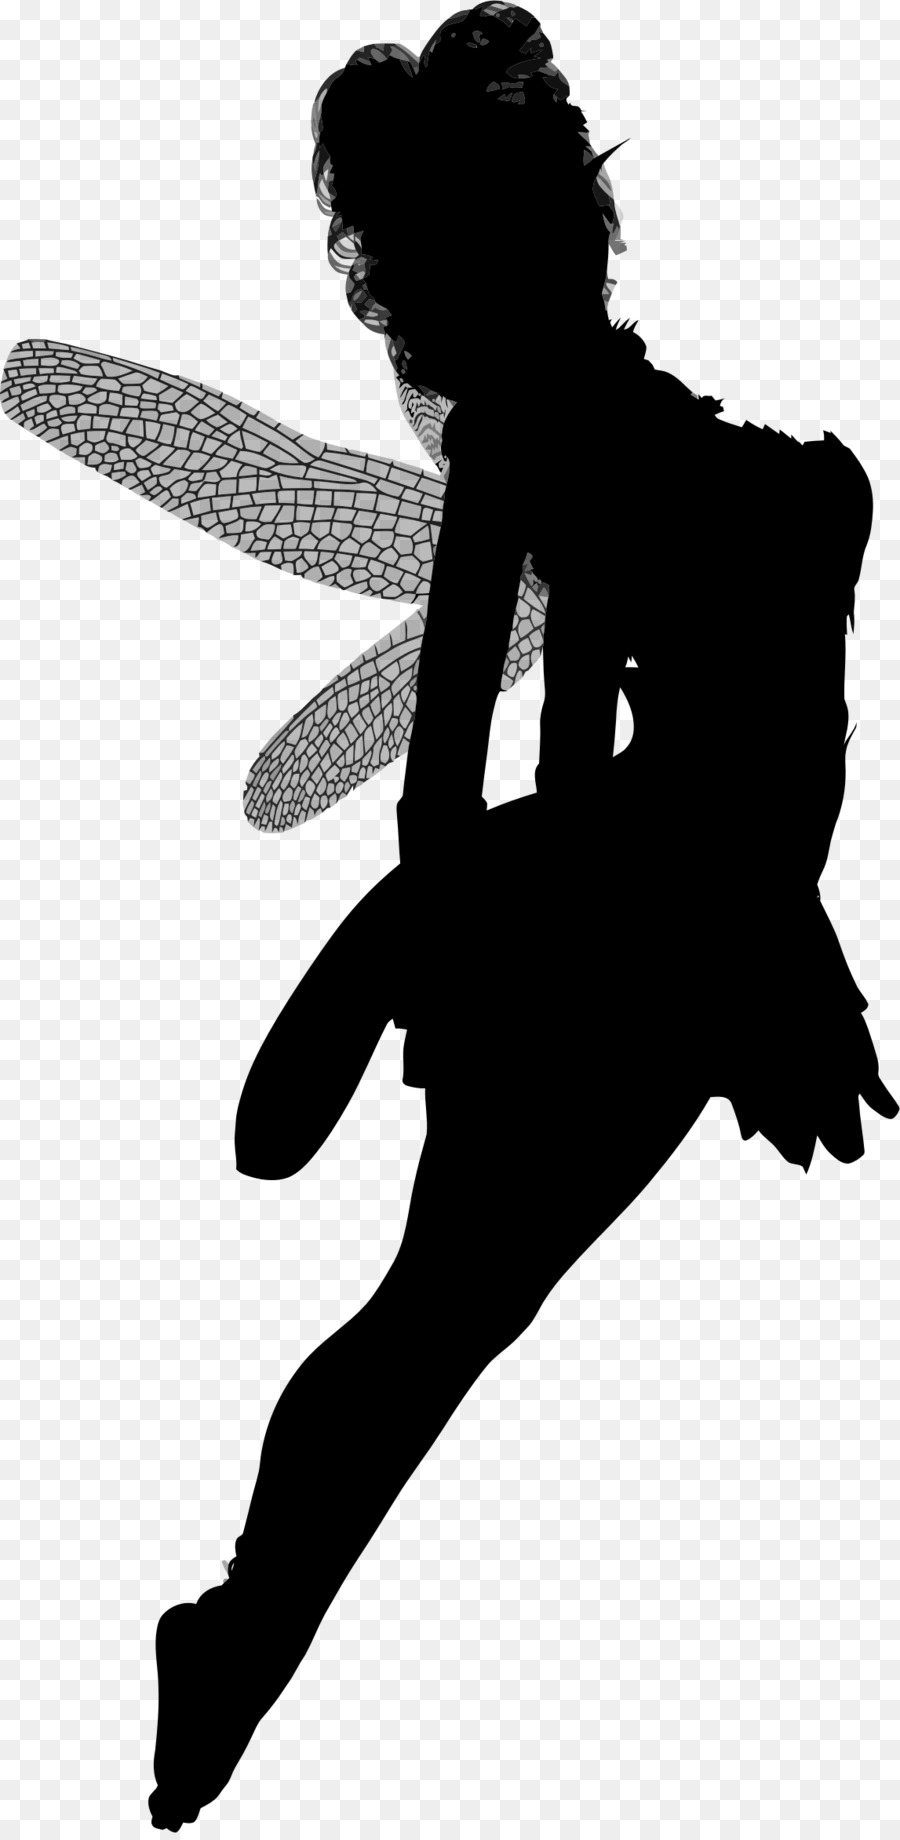 Silhouette Fairy Clip art - Silhouette png download - 1147*2336 - Free Transparent  png Download.